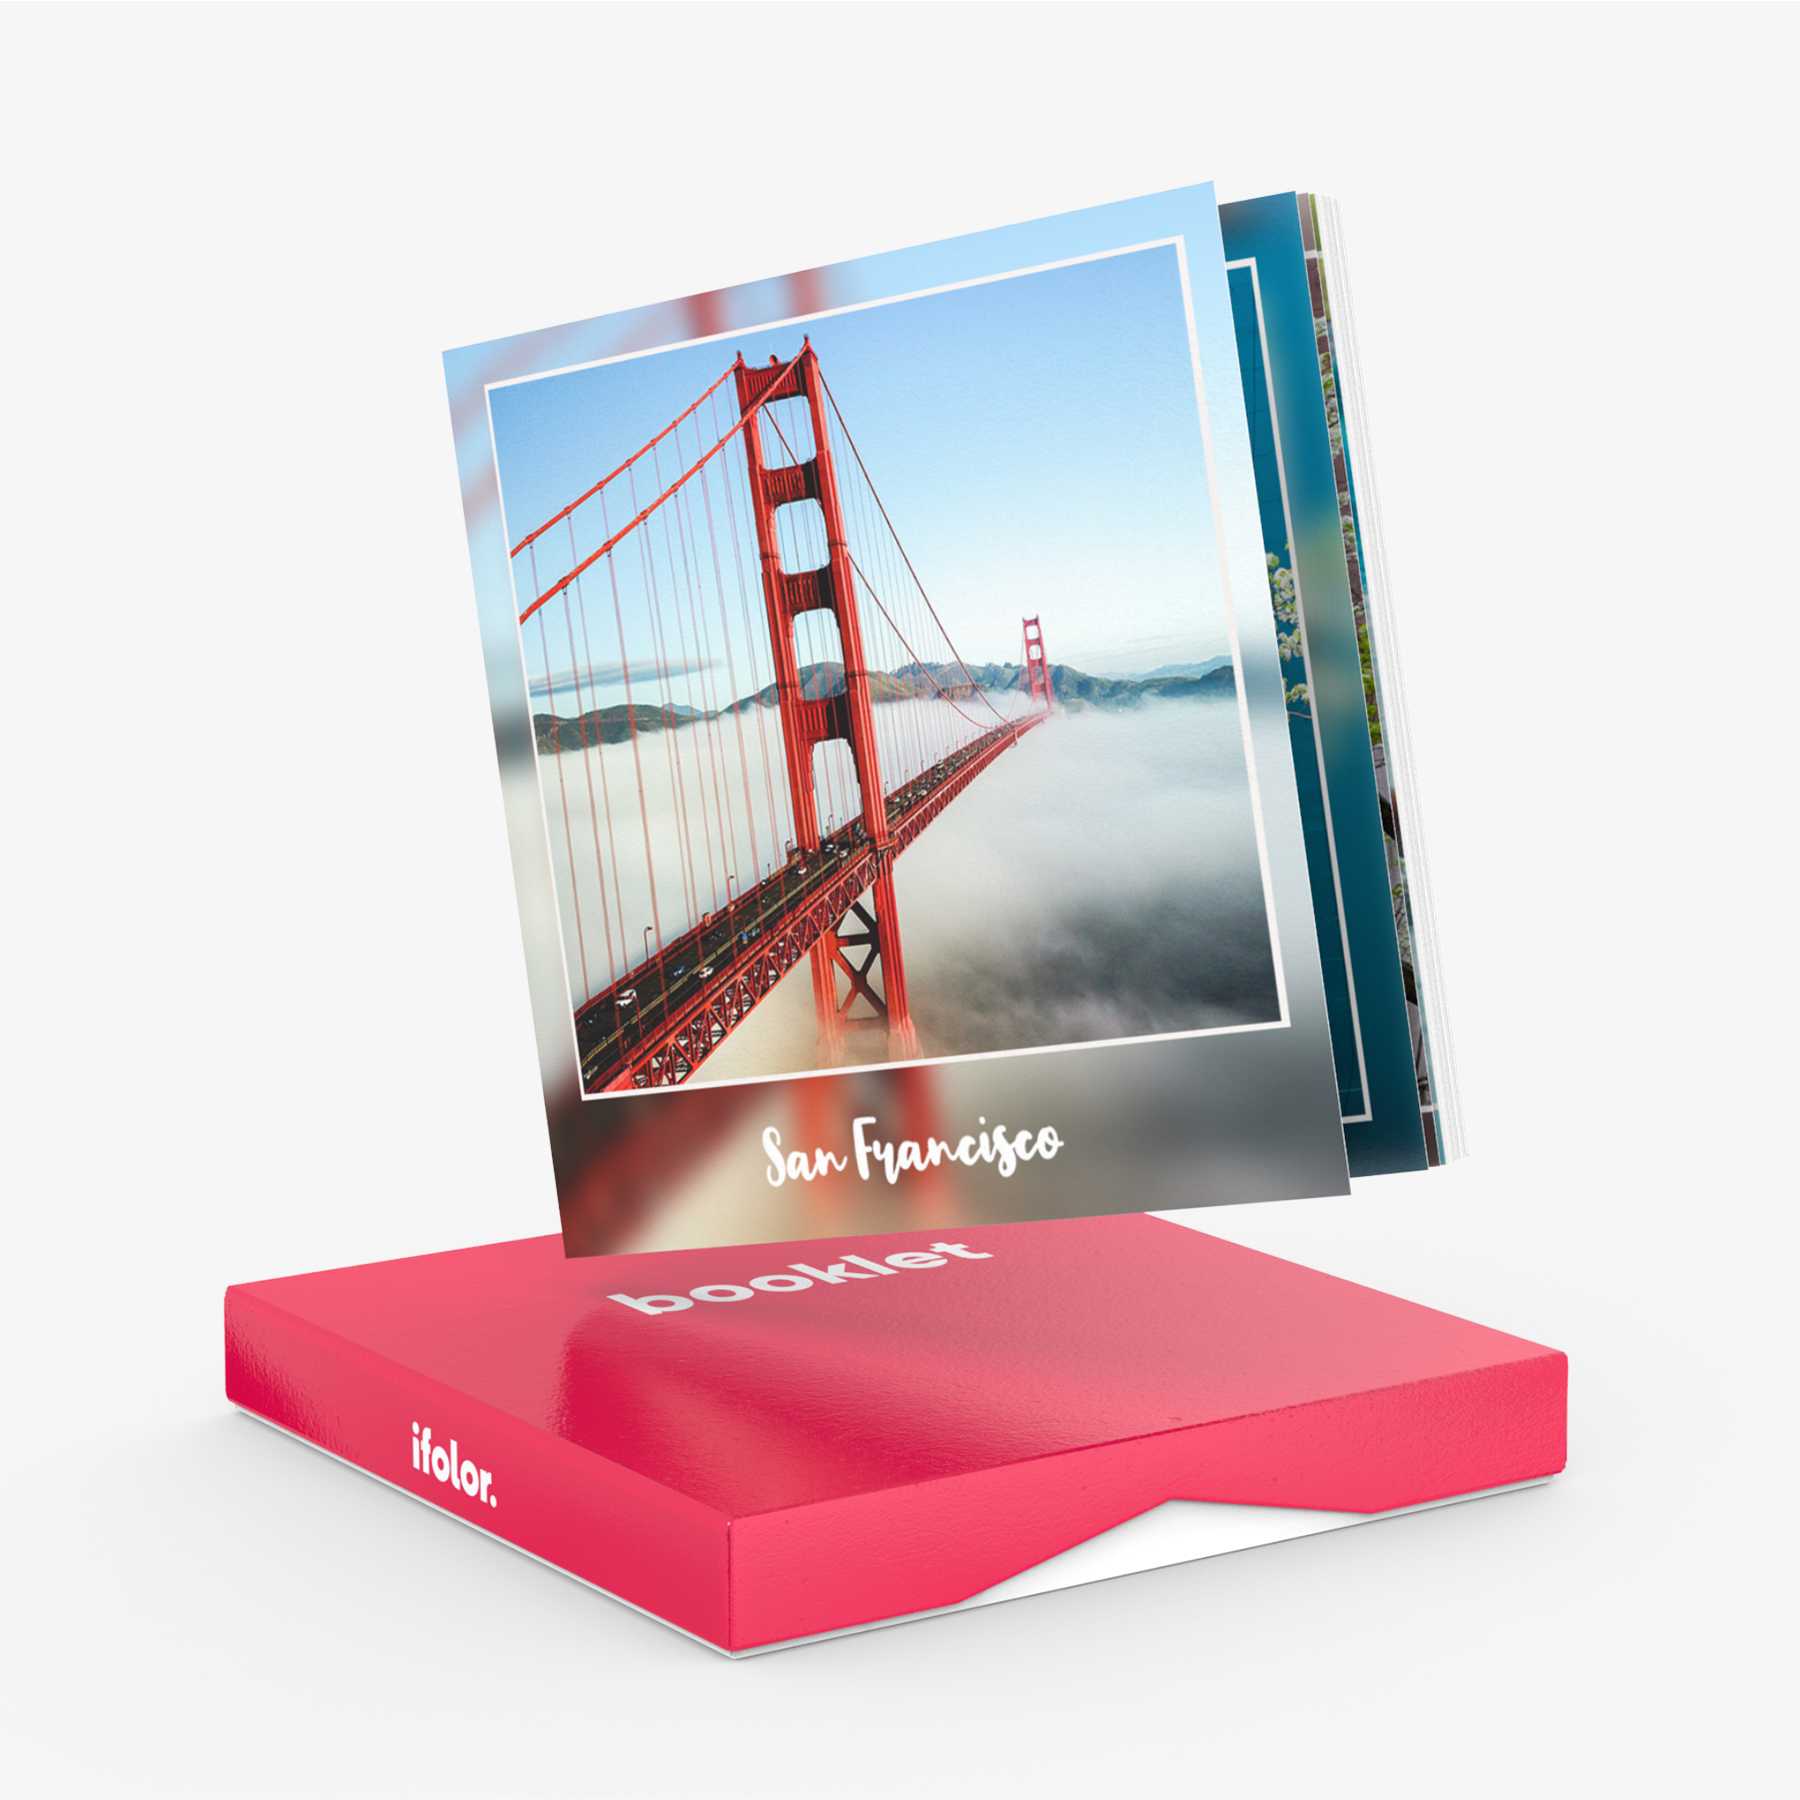 Booklet: quick and easy Mini photo book | ifolor